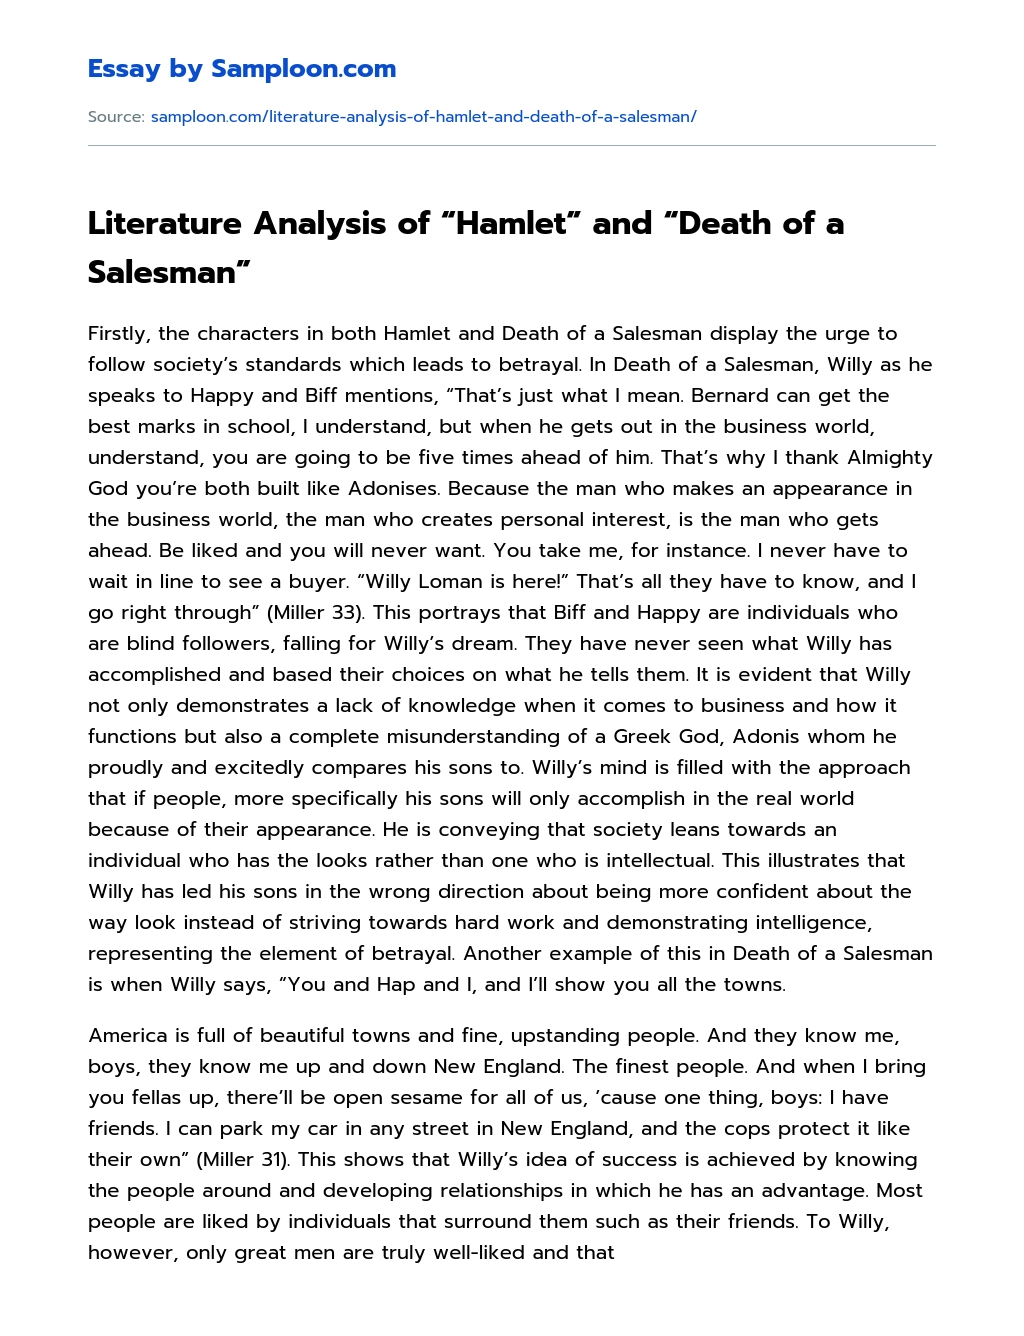 Literature Analysis of “Hamlet” and “Death of a Salesman” essay